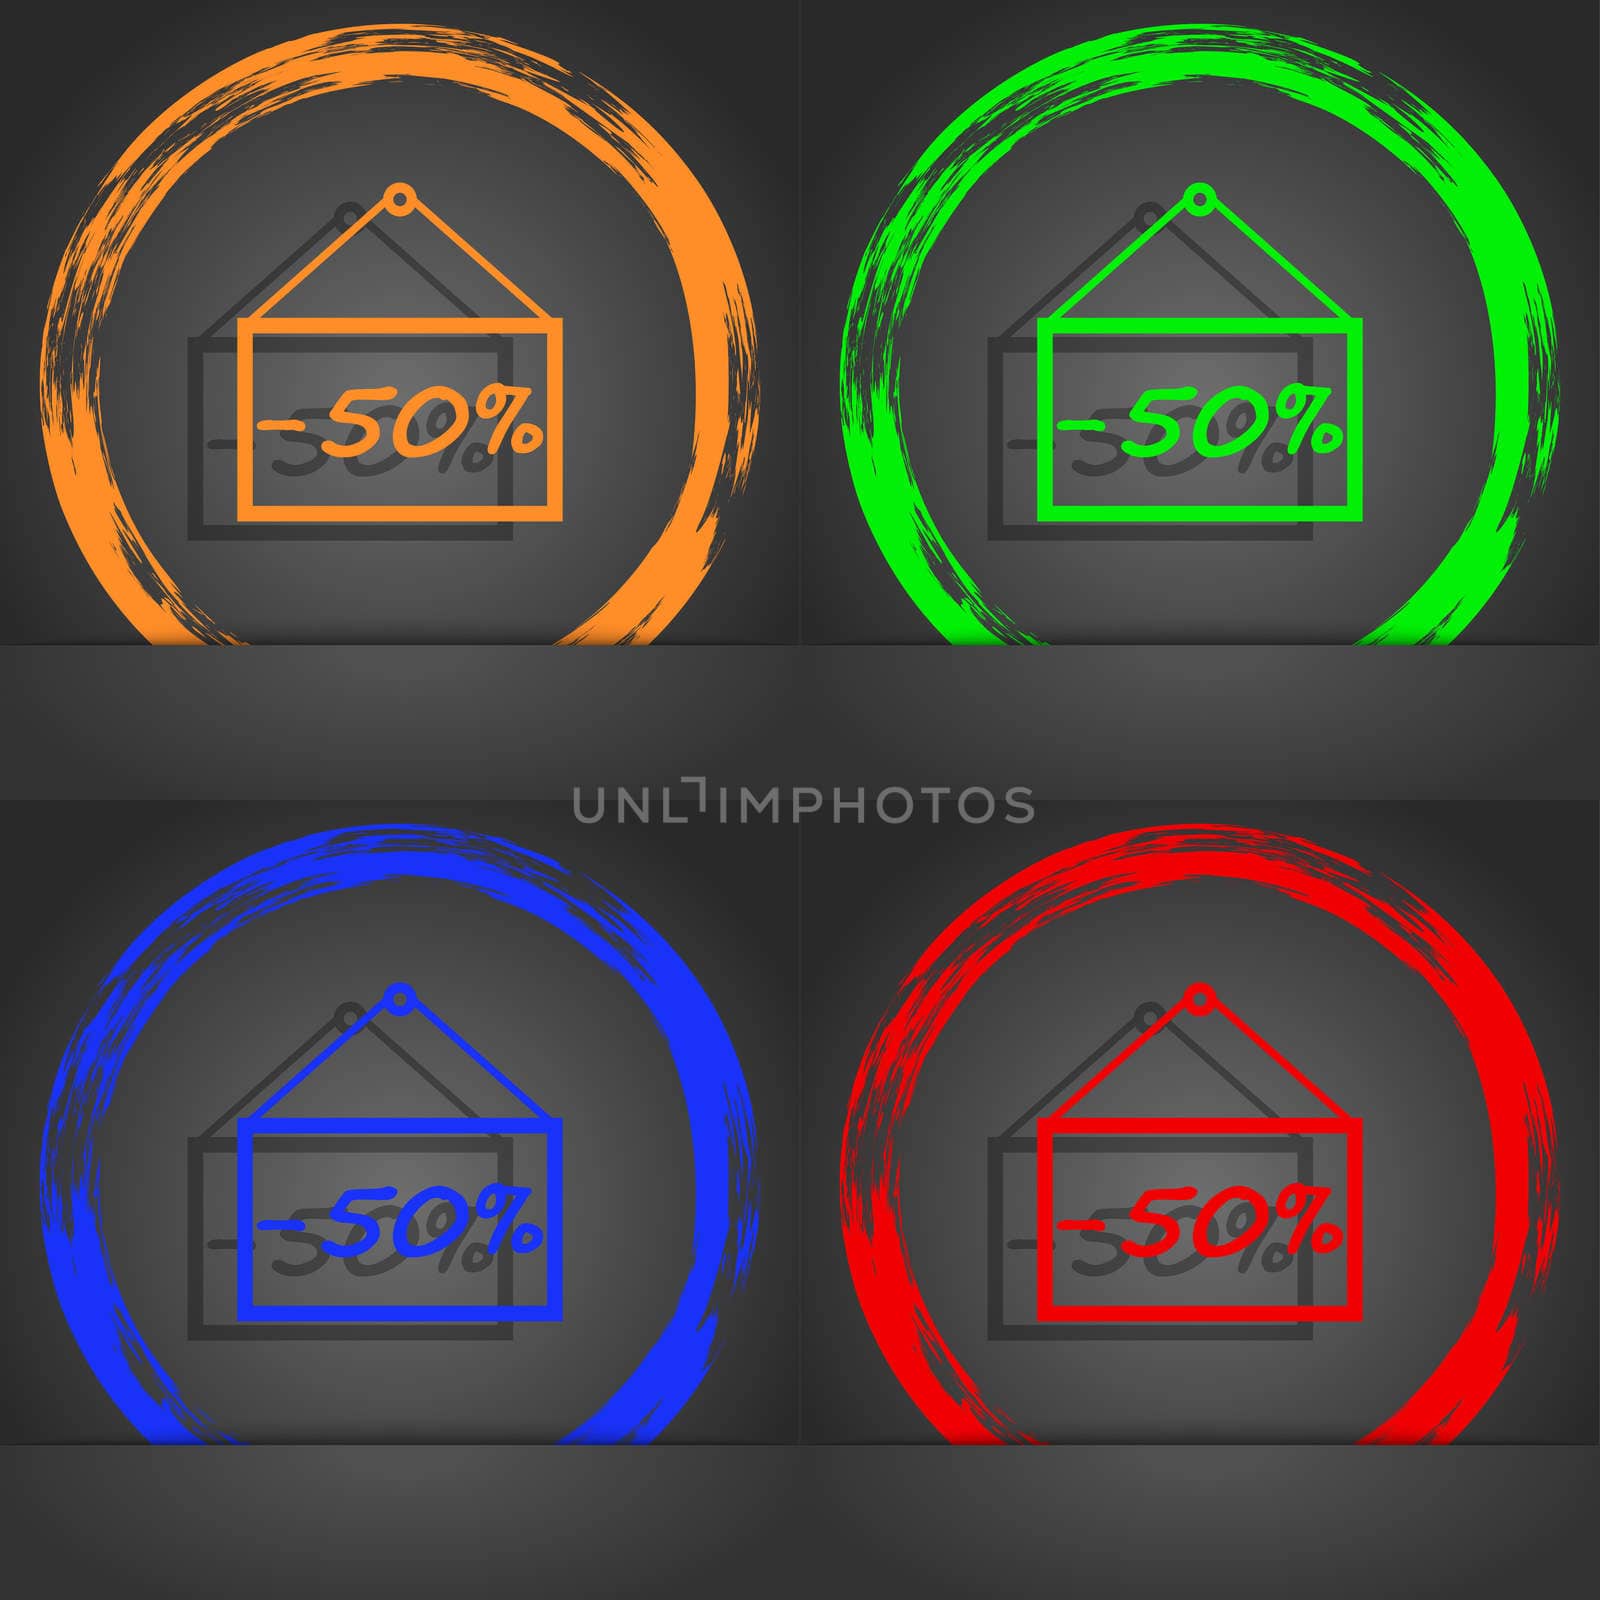 50 discount icon sign. Fashionable modern style. In the orange, green, blue, red design. illustration